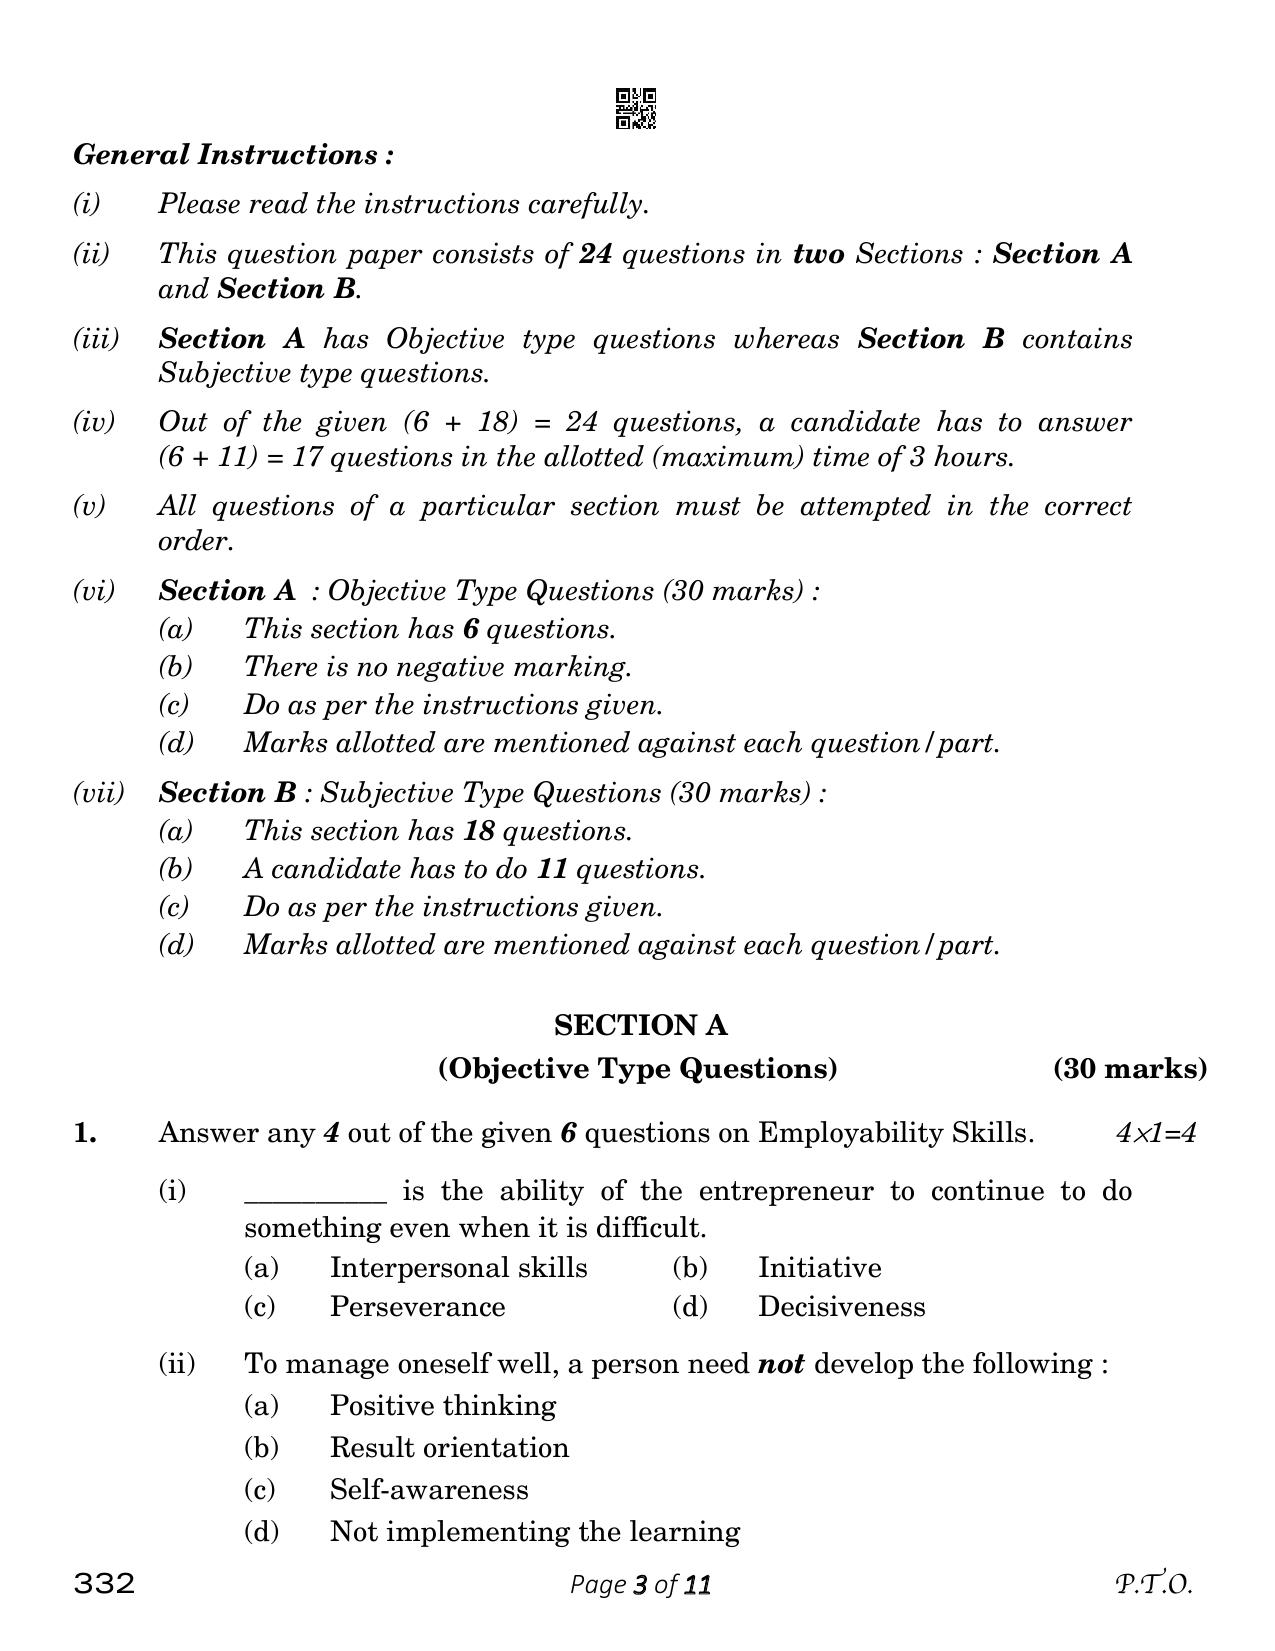 CBSE Class 12 Agriculture (Compartment) 2023 Question Paper - Page 3